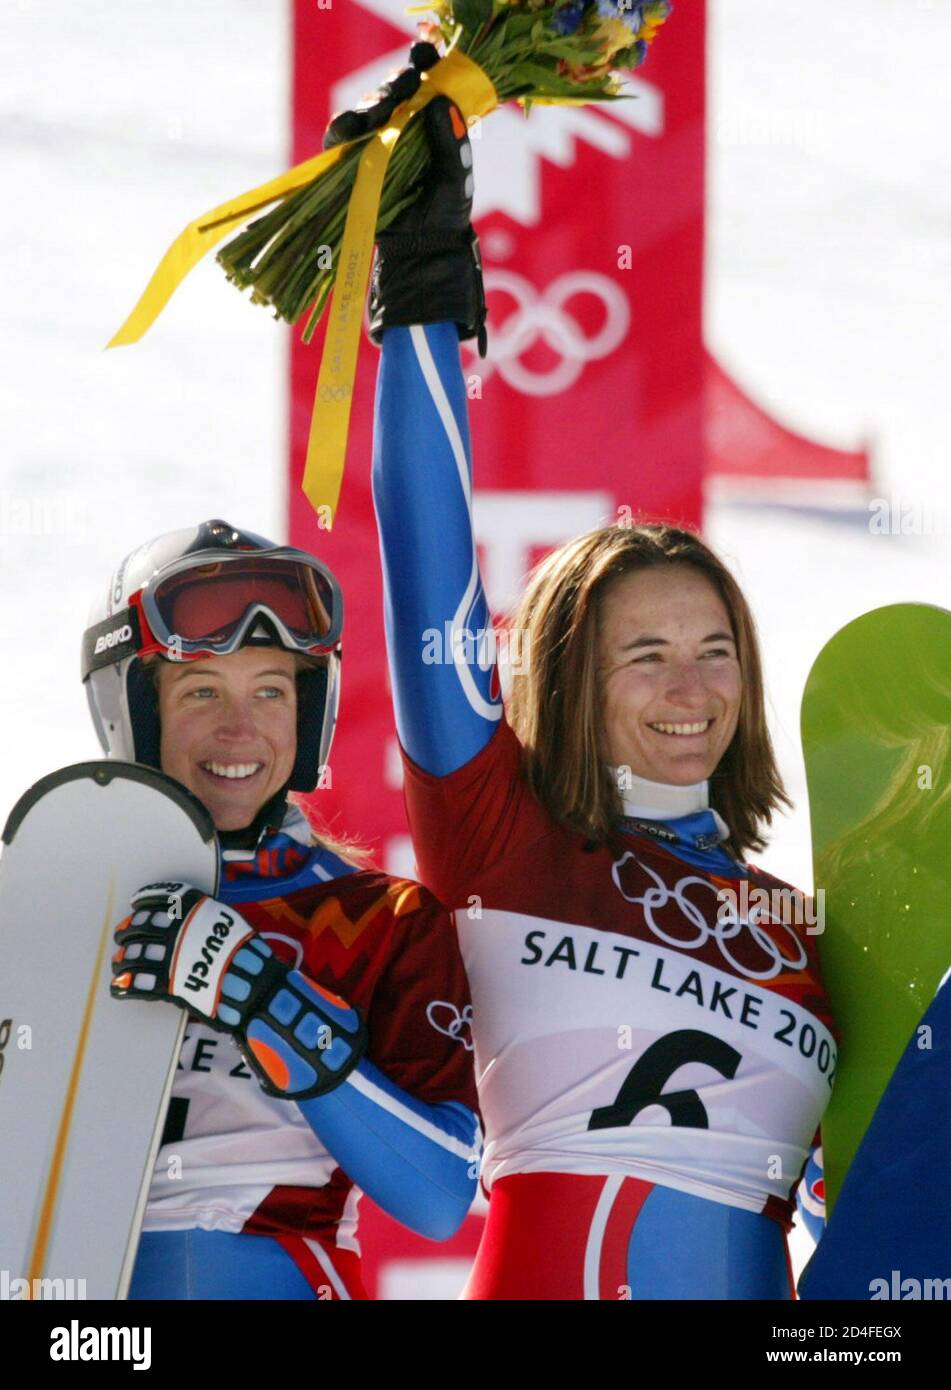 Isabelle Blanc (R) and Karine Ruby of France stand together after Blanc won  the gold medal in the women's snowboard parallel giant slalom at the Salt  Lake 2002 Olympic Winter Games in